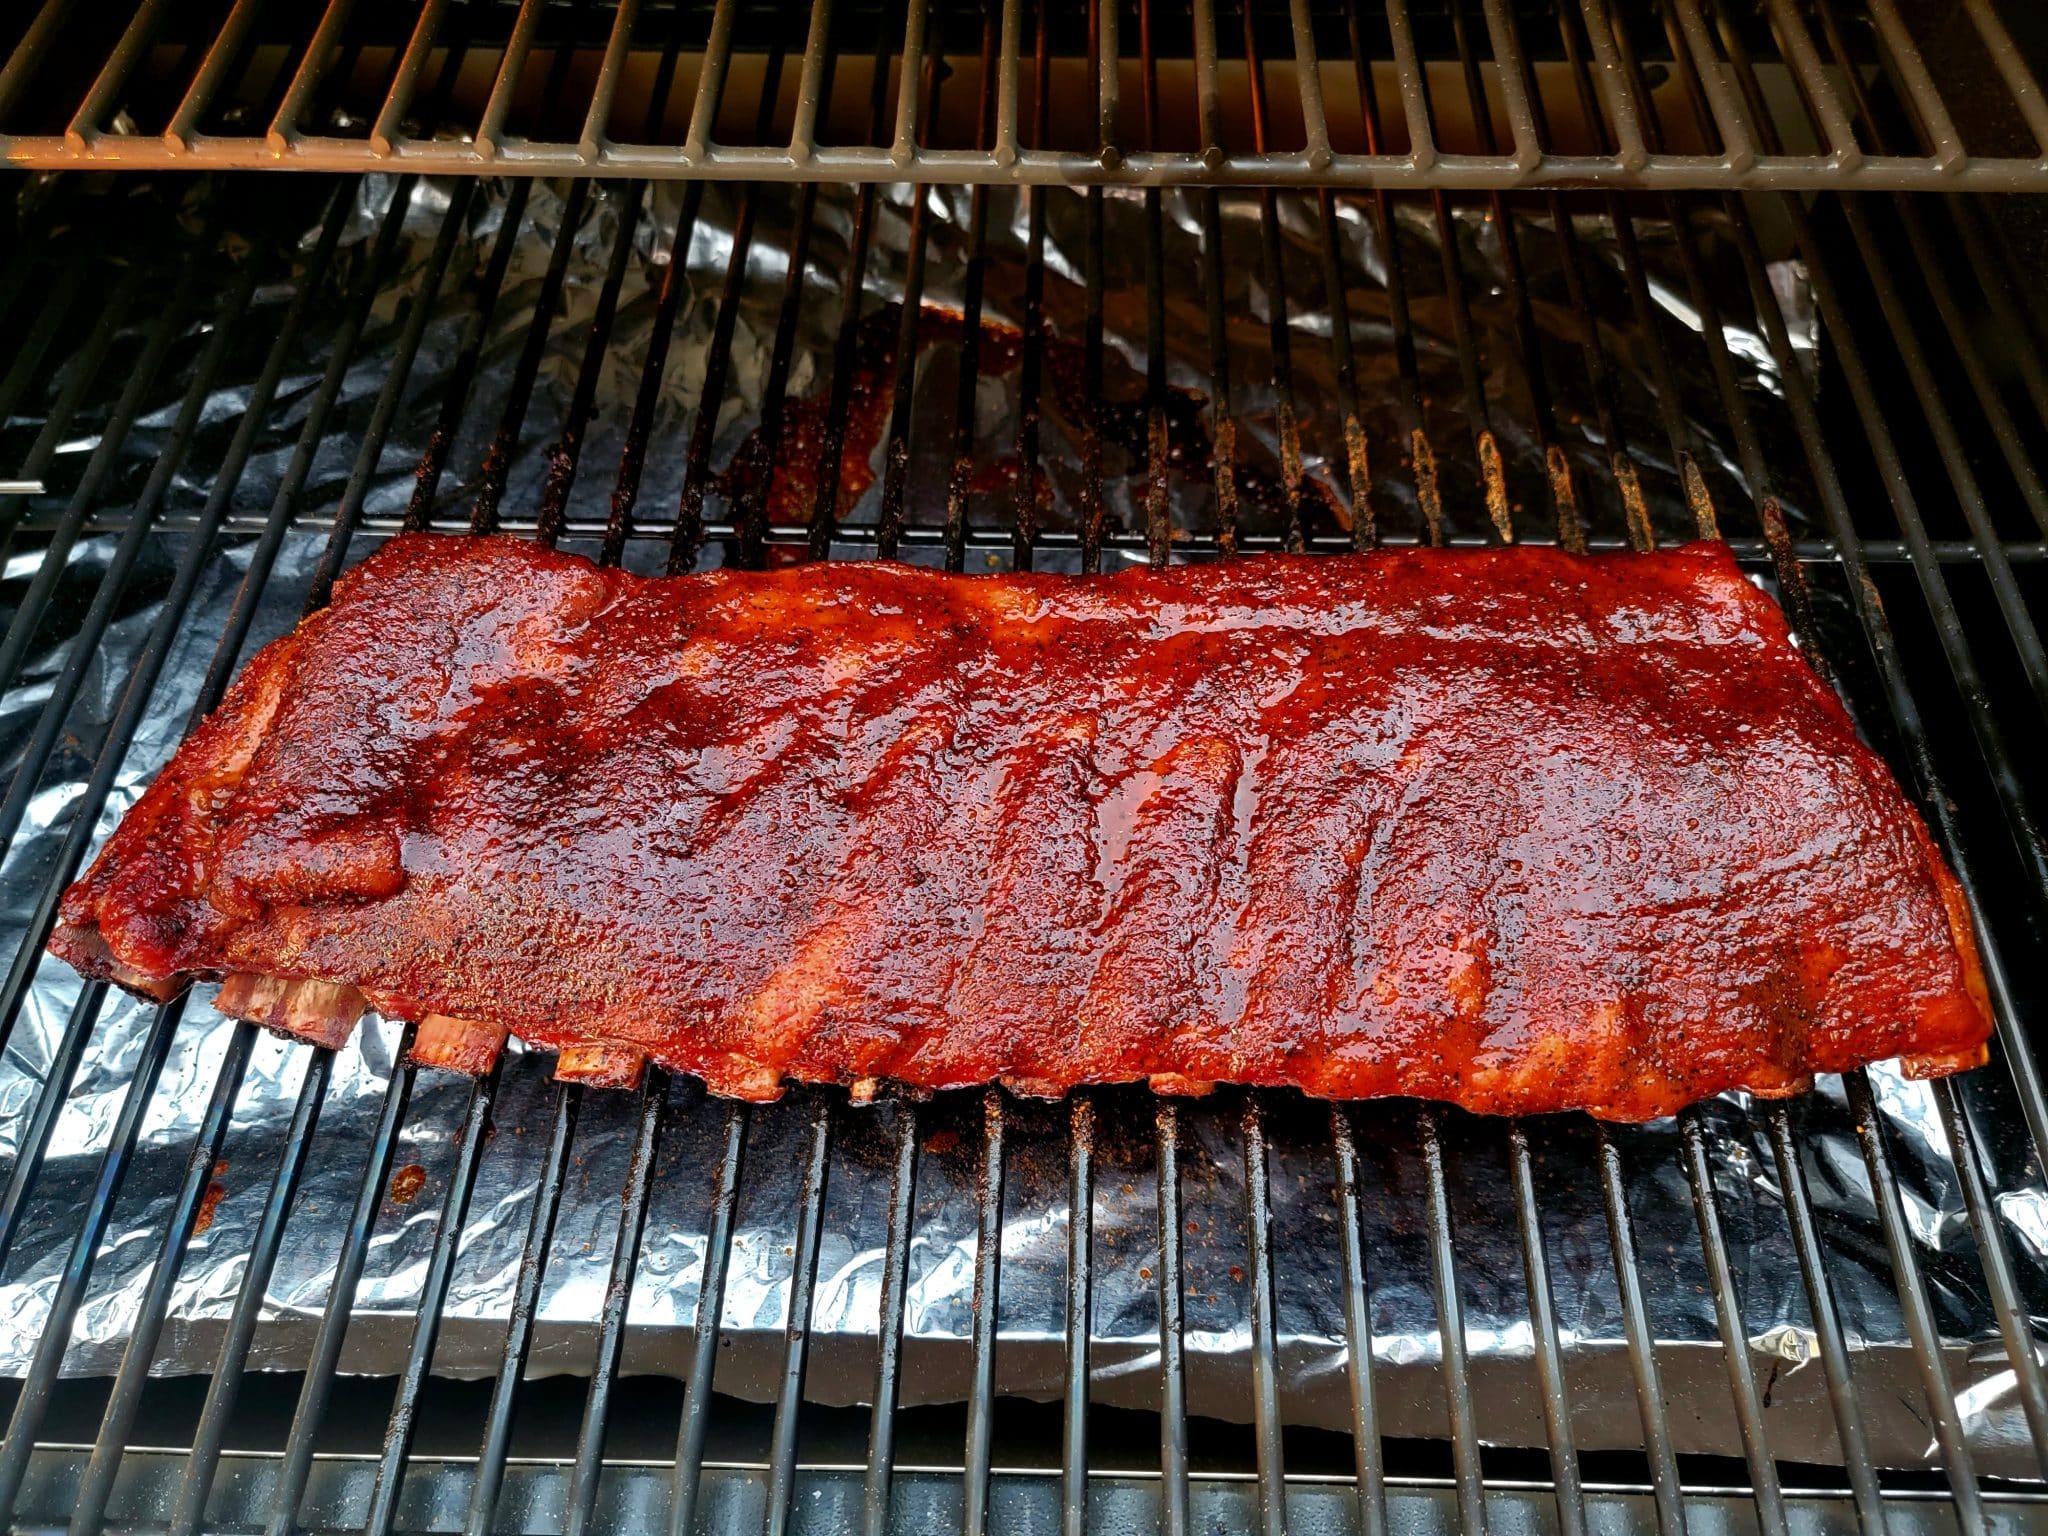 juicy red ribs